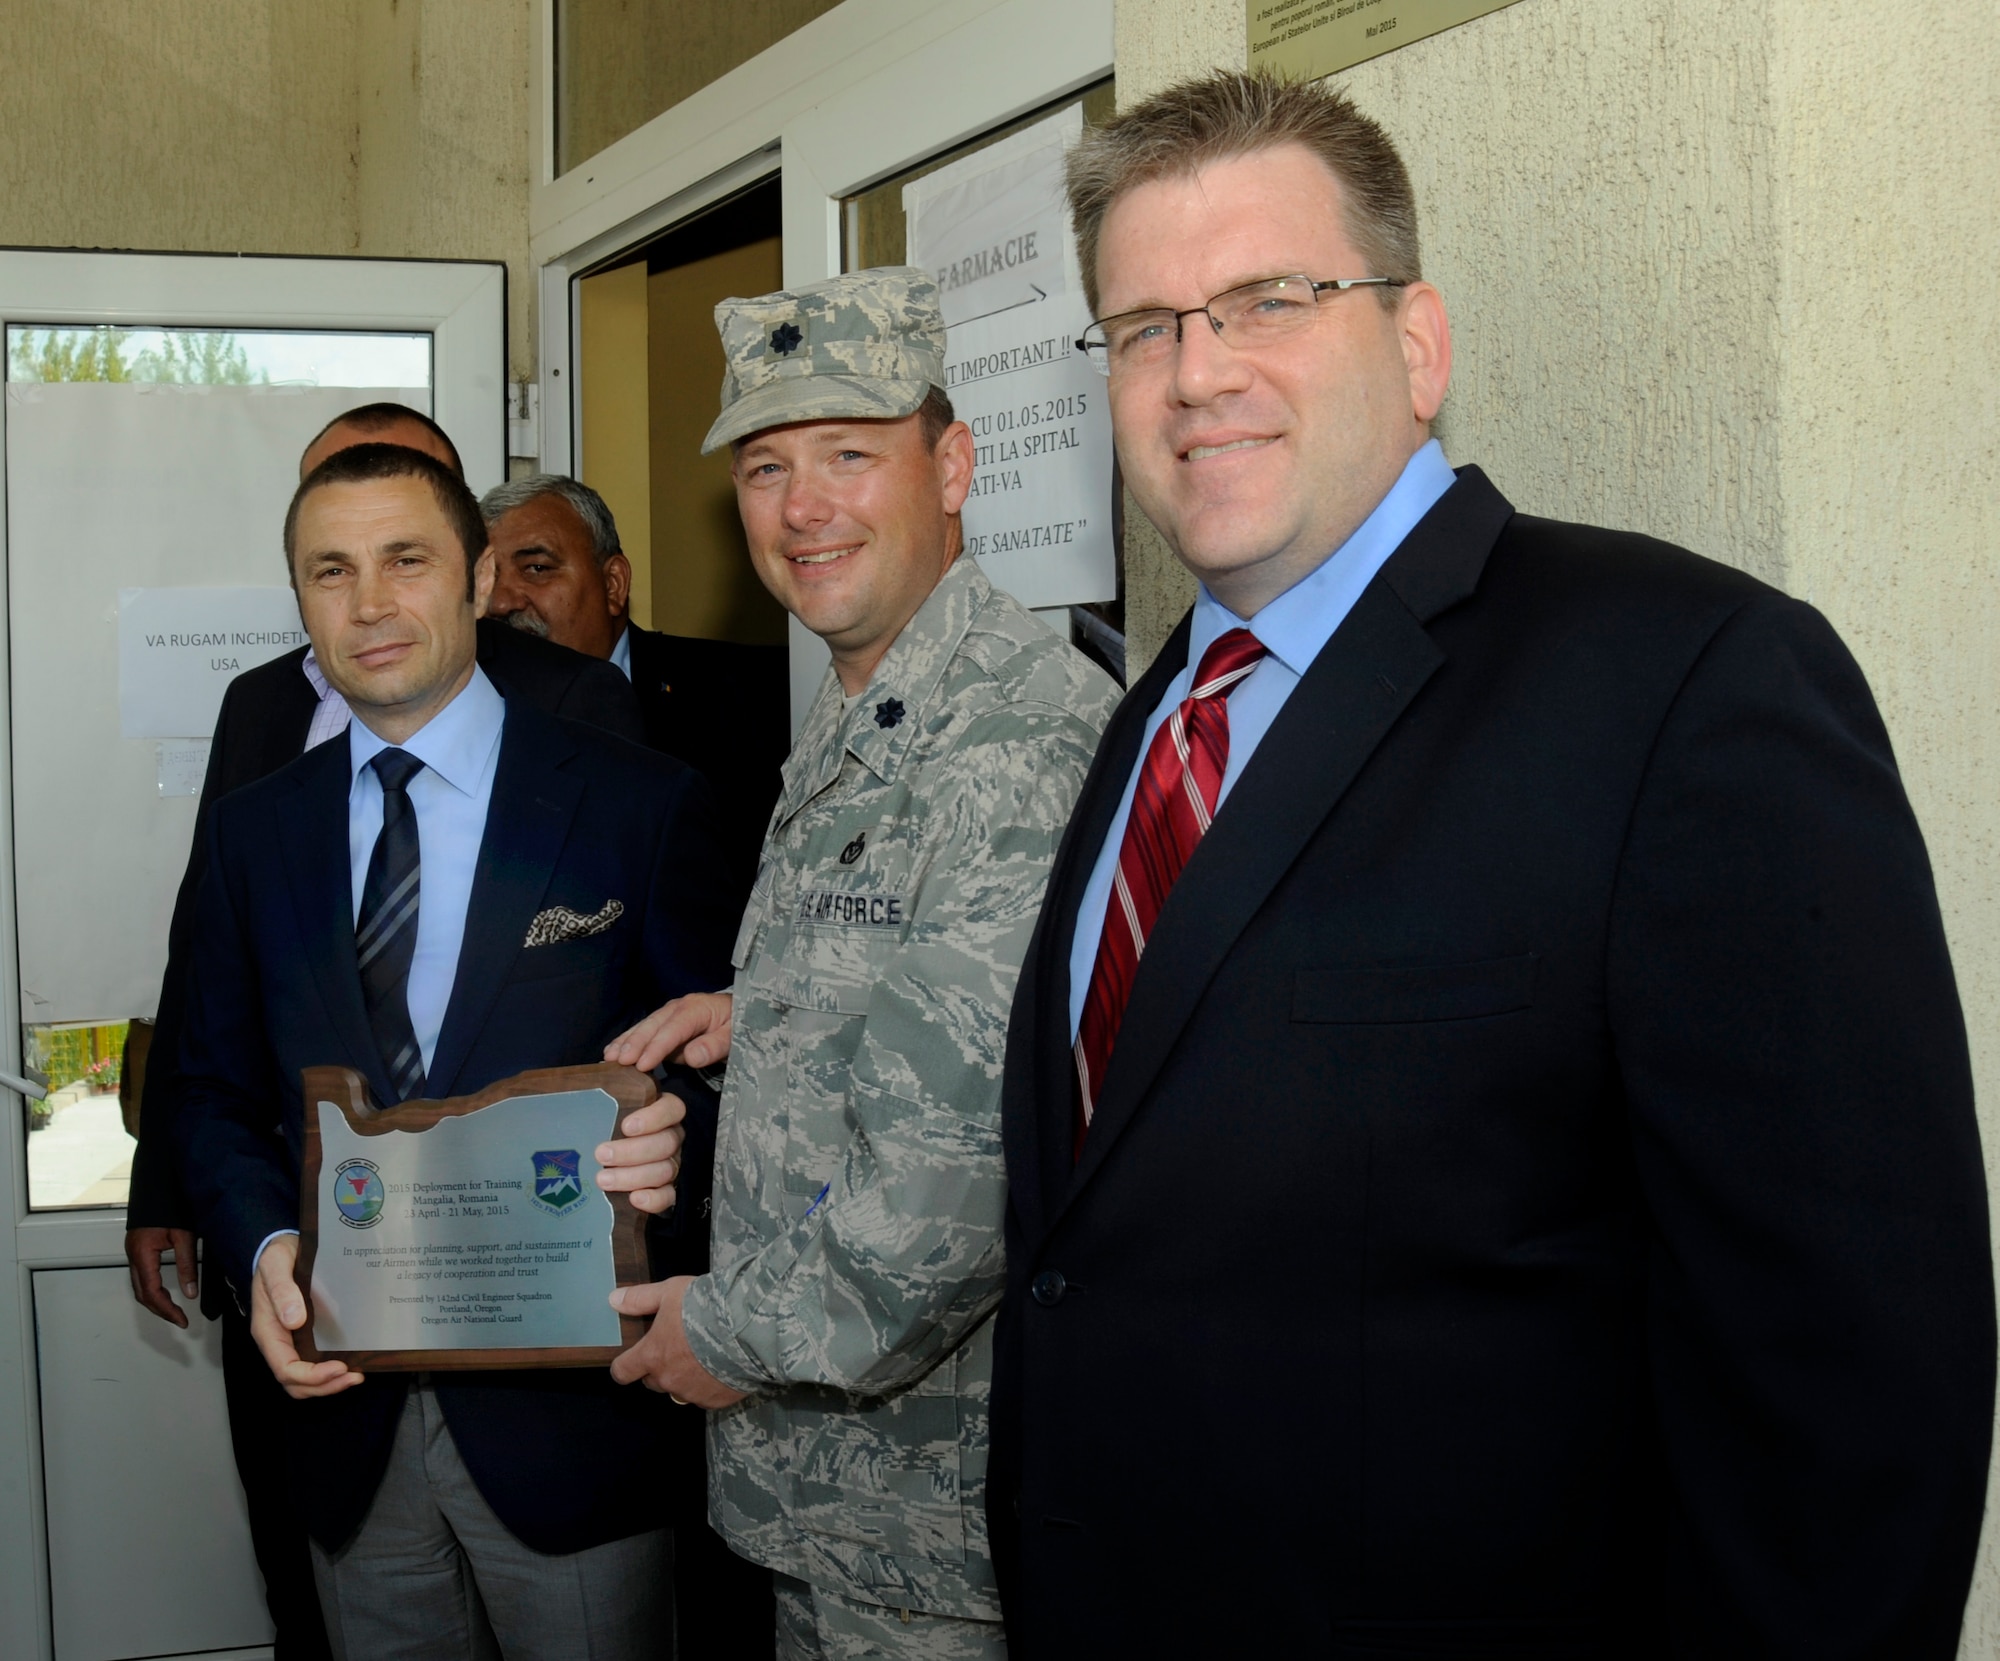 U.S. Charge d’Affairs a.i., Dean Thompson, right, along with and Mayor of Mangalia, Romania, Radu Cristian, left, pause for a photograph with Lt. Col. Jason Lay, 142nd Fighter Wing Civil Engineer Squadron, center, as he presents a plaque to the Mayor, after the ribbon cutting of the renovated Pavilion C of the Mangalia City Hospital, Romania, May 20, 2015, as part of the U.S. European Command’s (EUCOM) Humanitarian Civic Assistance Program (HCA). The EUCOM HCA program is designed to improve the host nation's critical infrastructure and the underlying living conditions of the civilian populace. (U.S. Air National Guard photo by Tech. Sgt. John Hughel, 142nd Fighter Wing Public Affairs/Released)